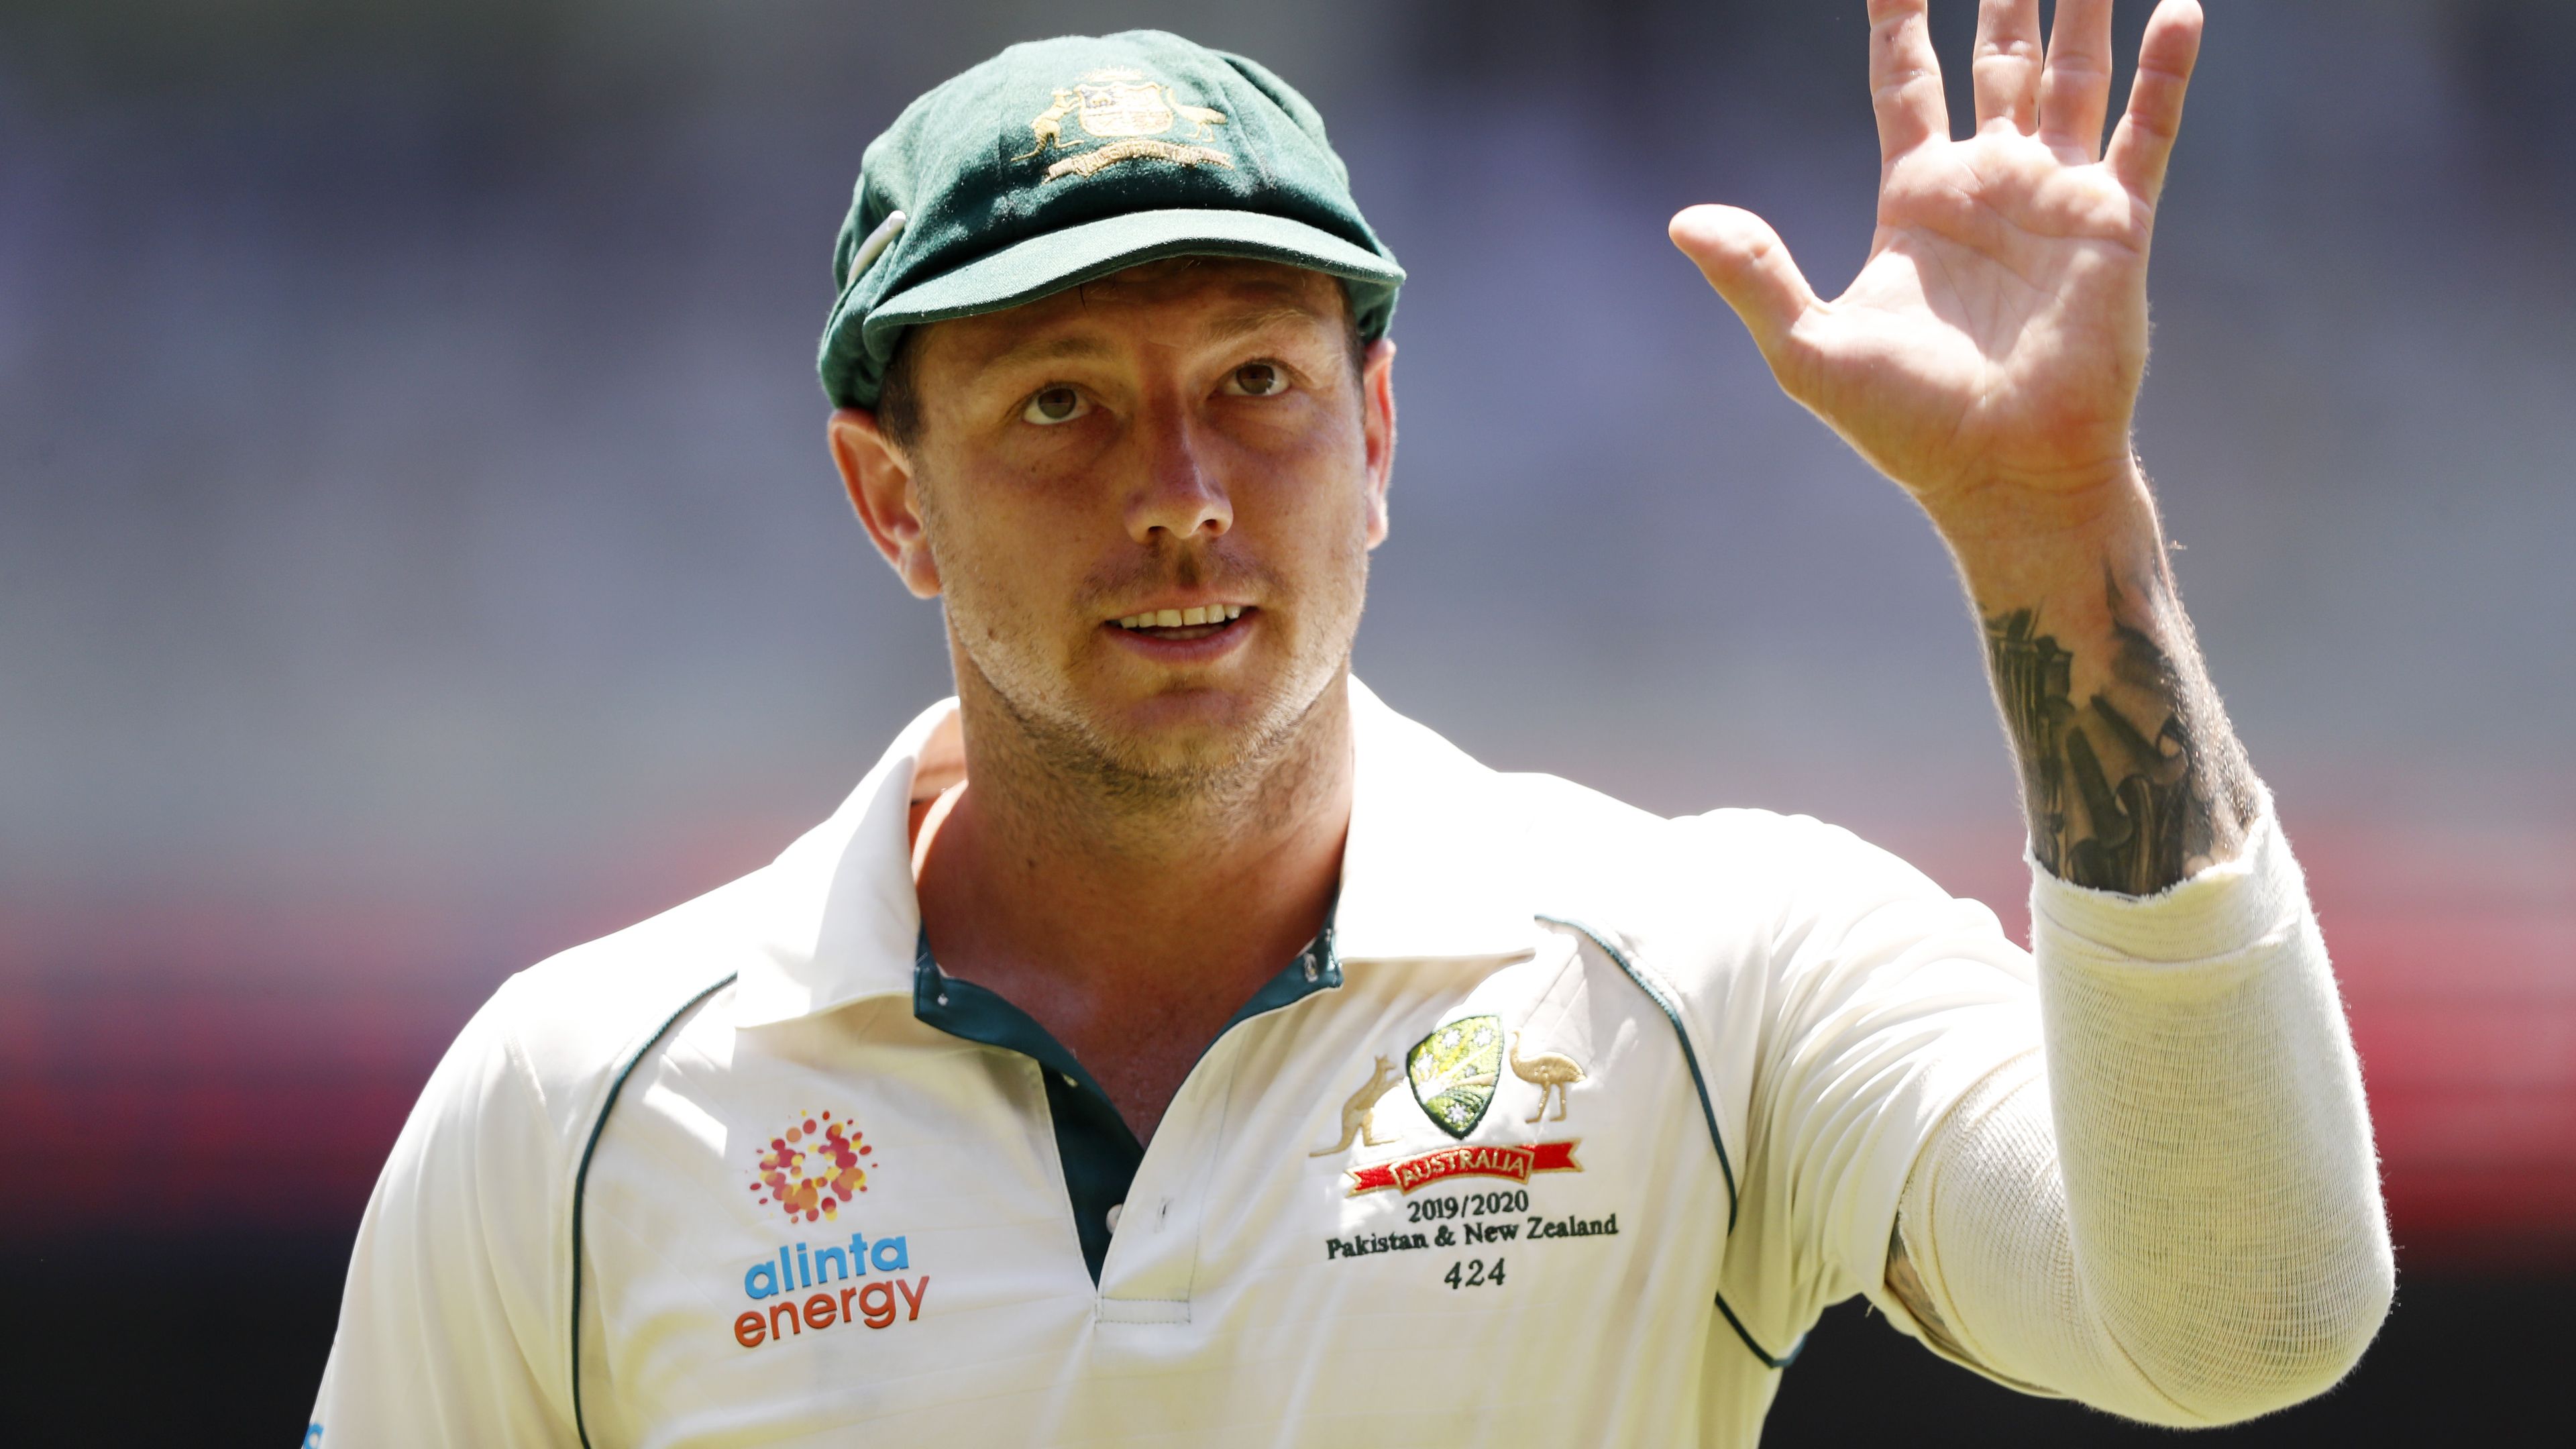 EXCLUSIVE: James Pattinson, ahead of his time and unlucky with injuries